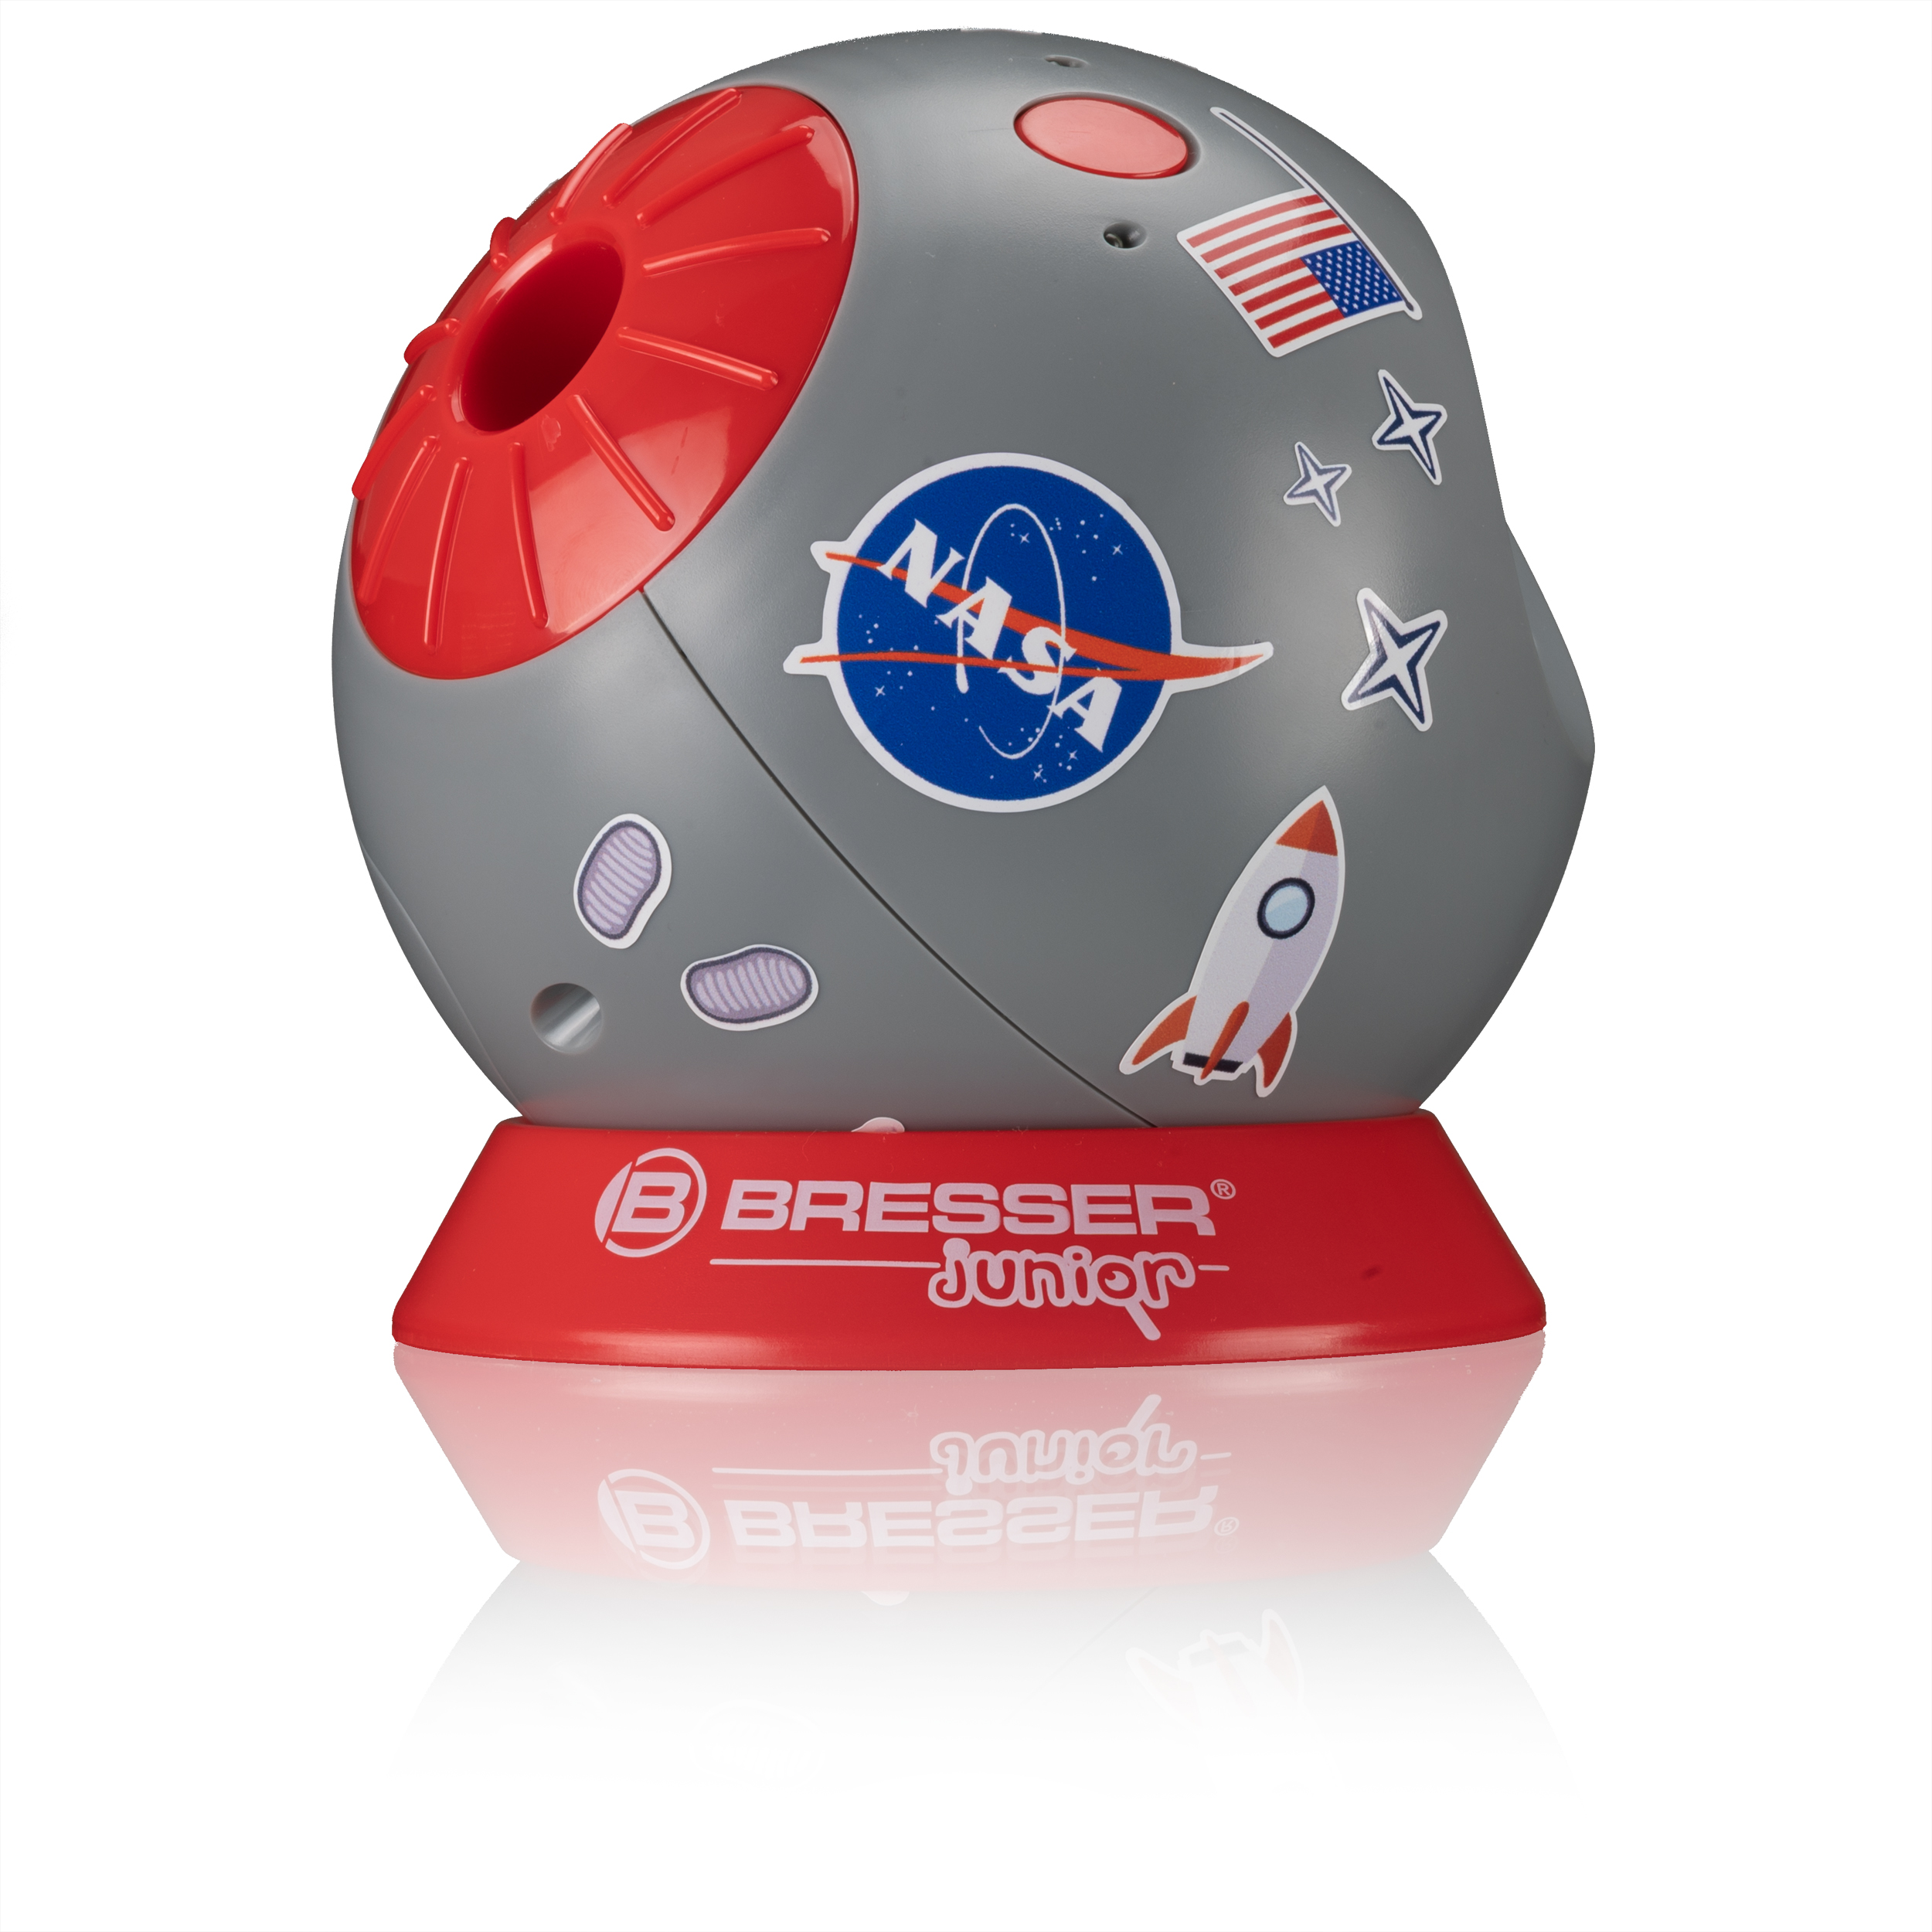 ISA Space Exploration NASA-themed Space Projector (Refurbished)